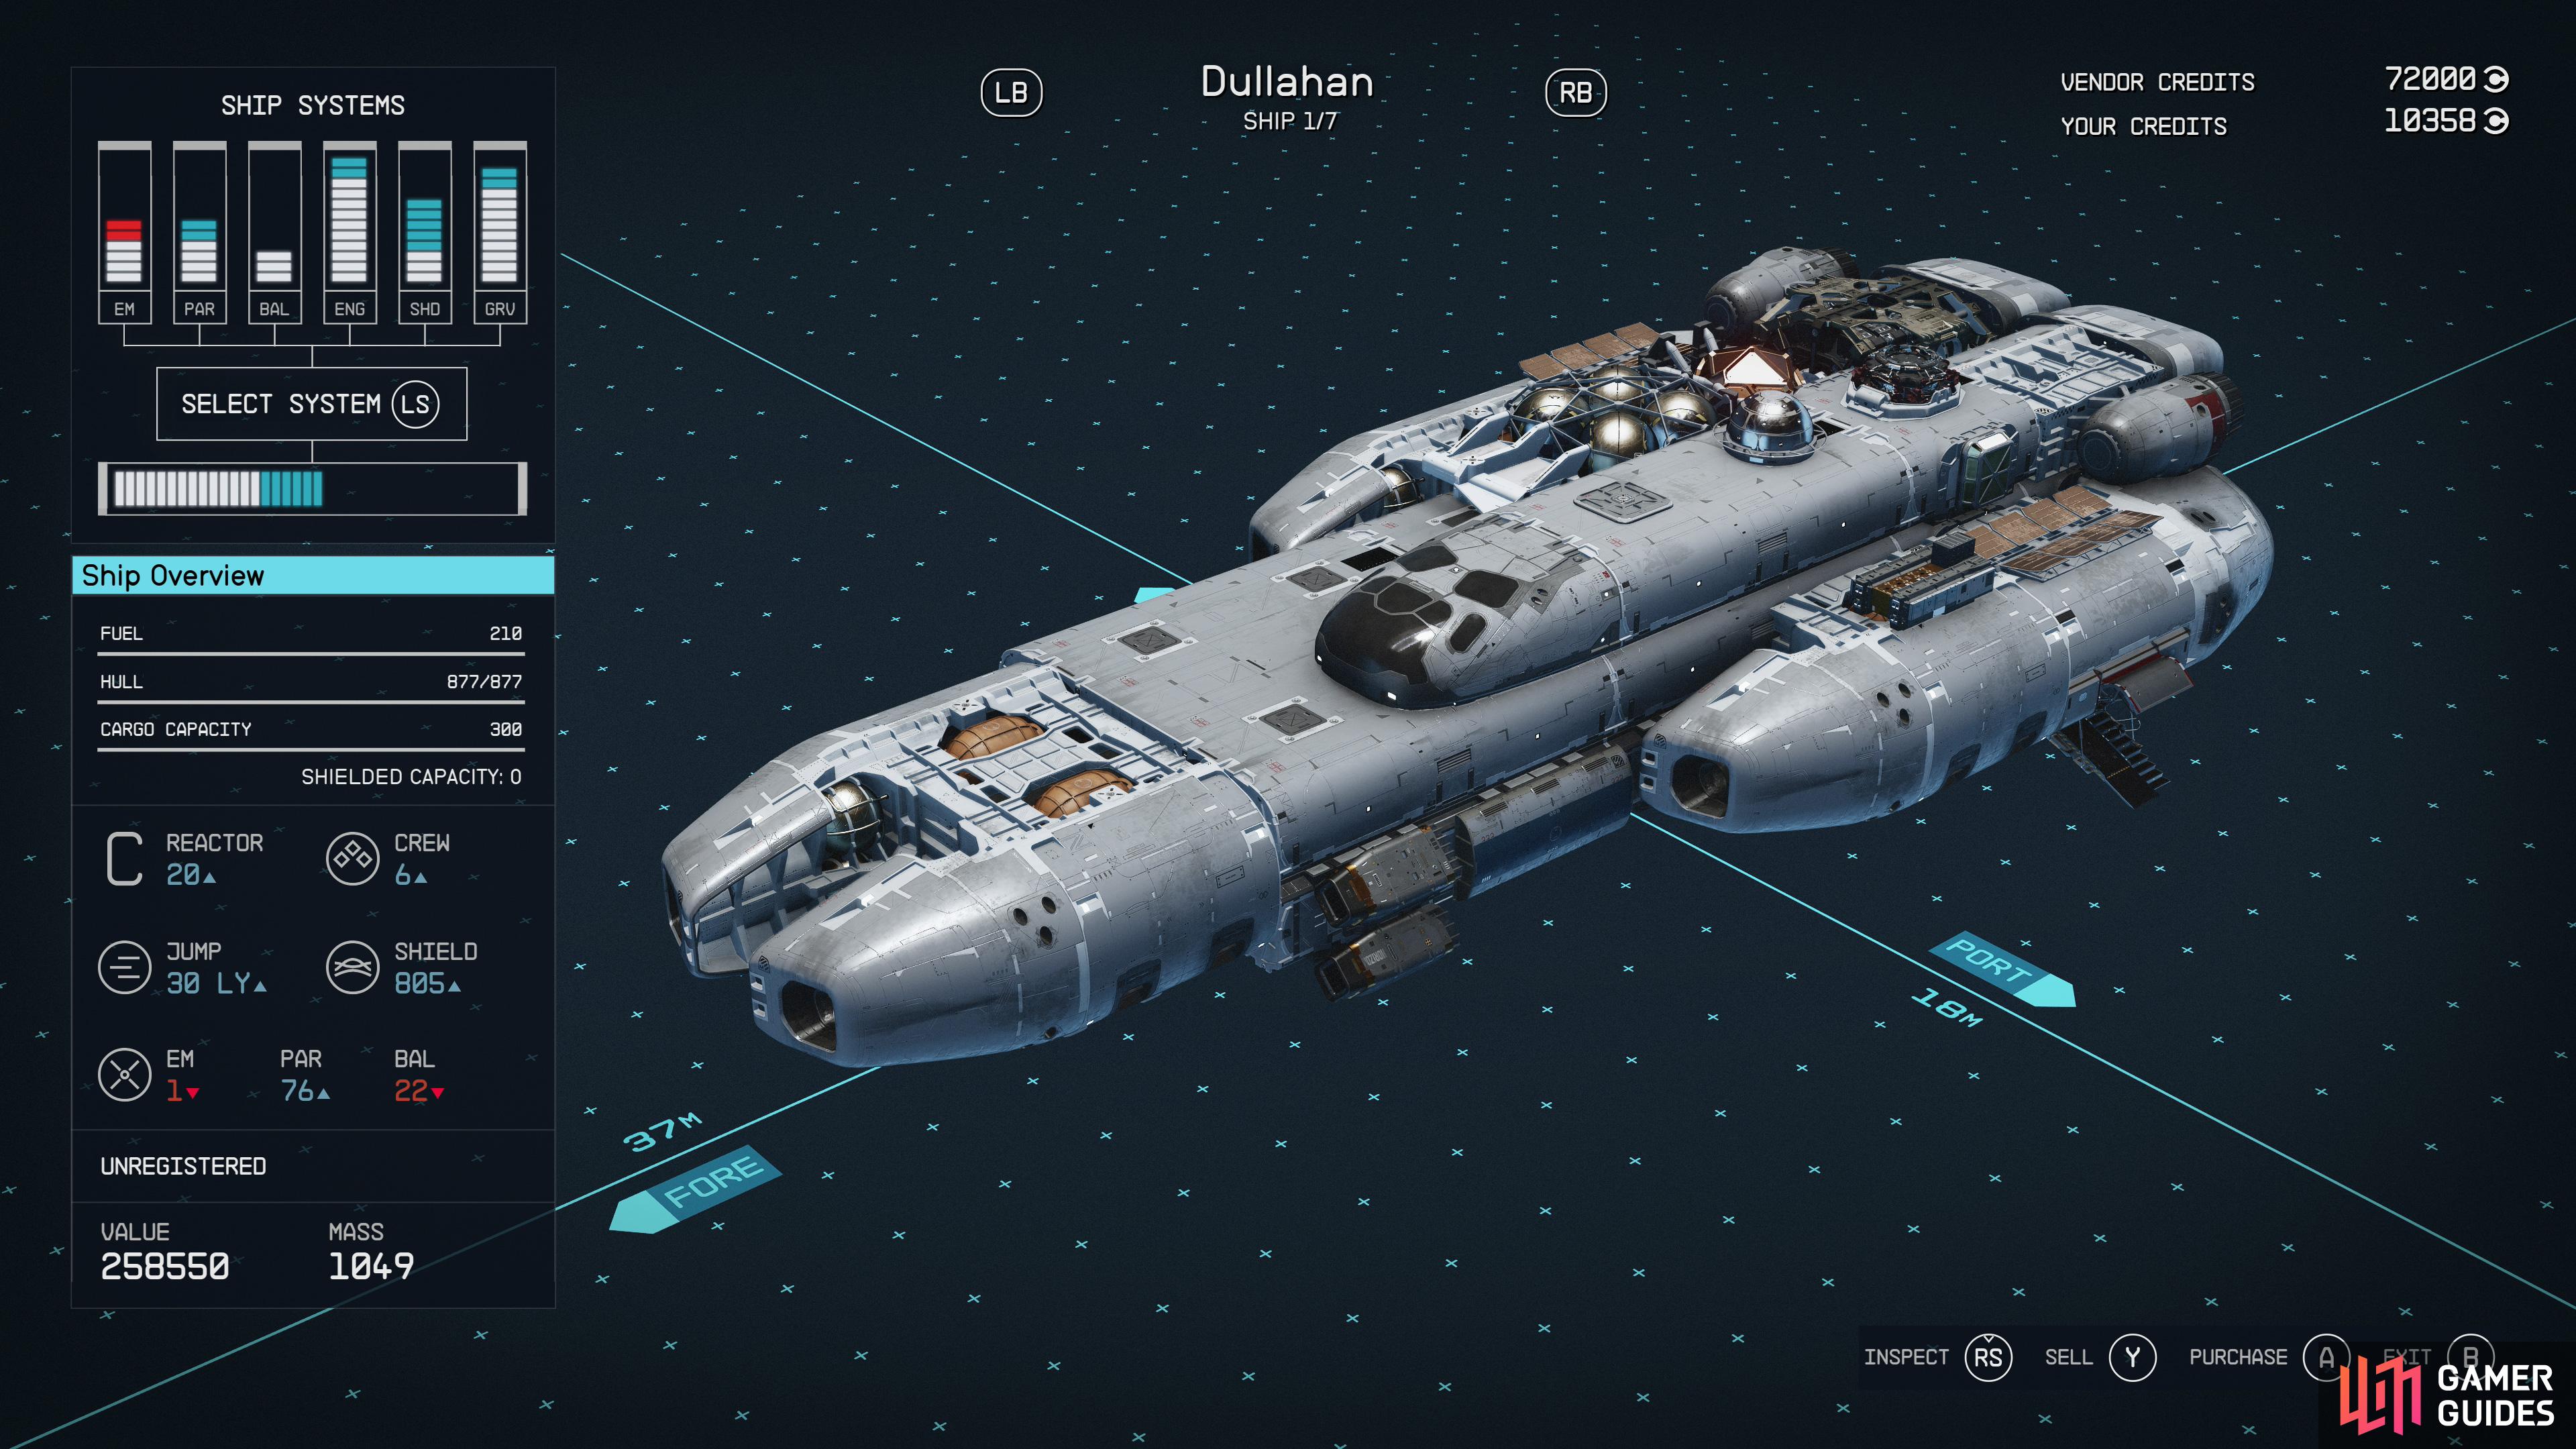 The least of the Class C ships you can buy, the Dullahan can be found for sale at various starship vendors.